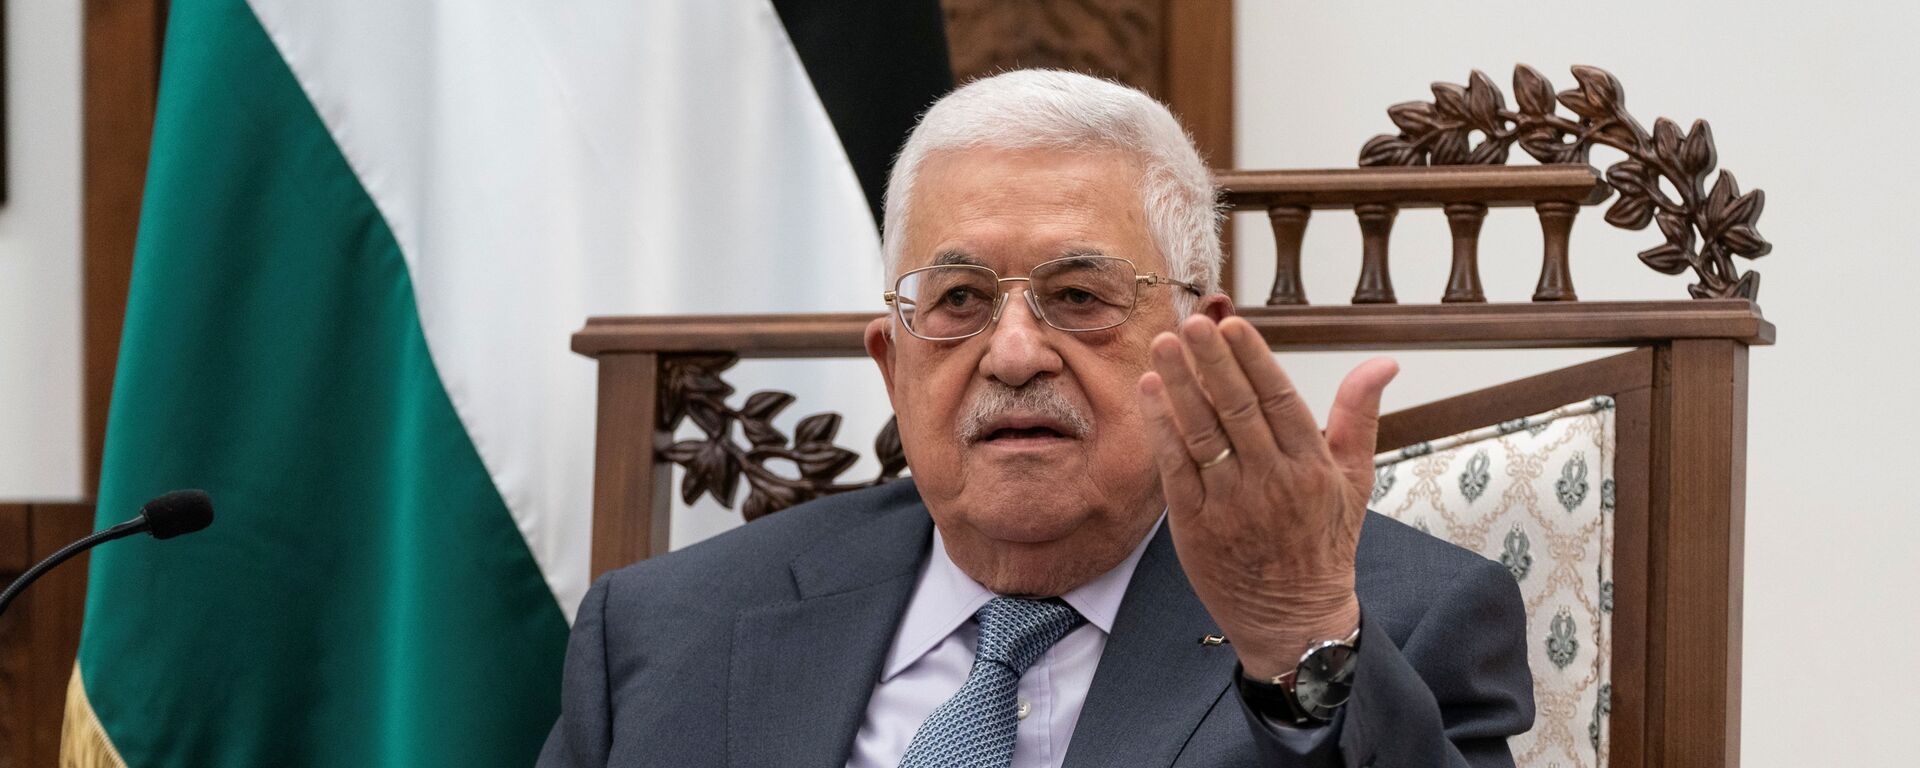 Palestinian President Mahmoud Abbas speaks during a joint press conference with U.S. Secretary of State Antony Blinken (not pictured), in the West Bank city of Ramallah, May 25, 2021. - Sputnik International, 1920, 24.06.2021